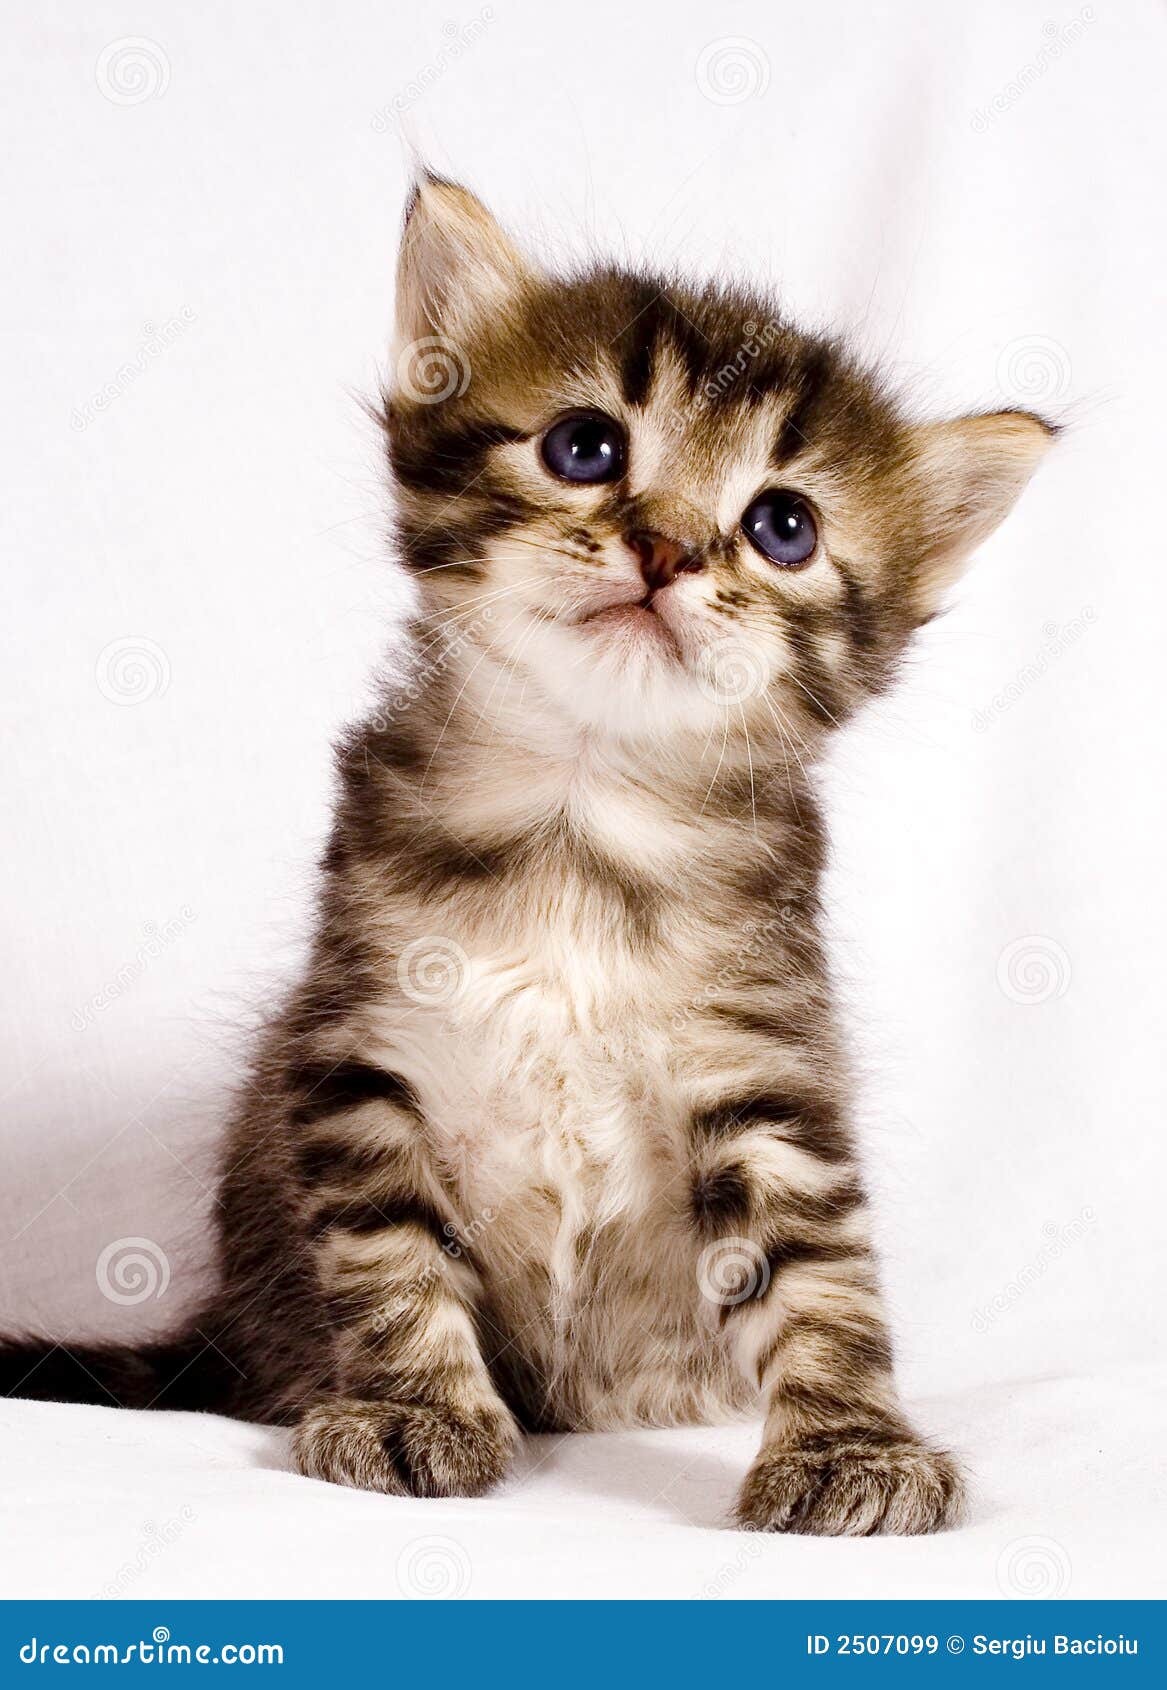 521,547 Cute Cat Kitten Stock Photos - Free & Royalty-Free Stock Photos  from Dreamstime